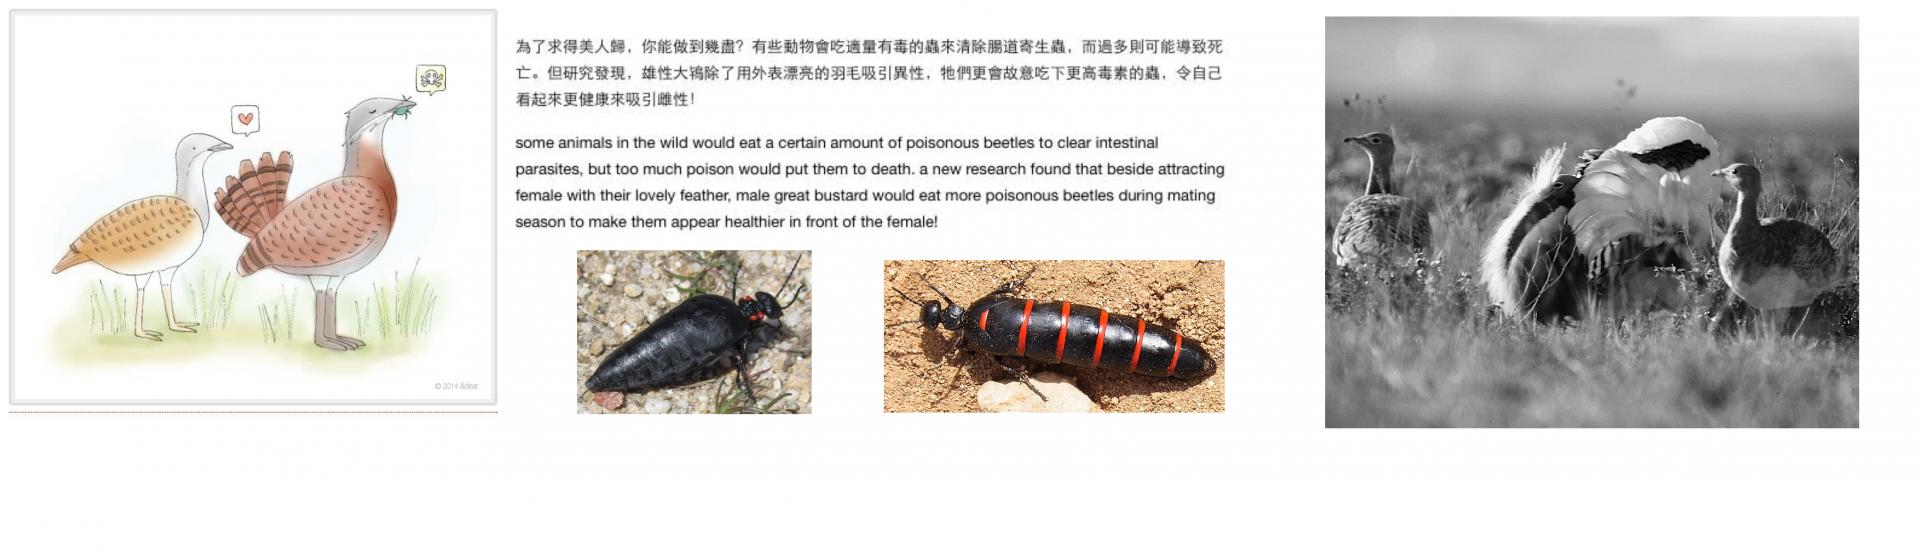 Bustards ingest toxic blister beetles (meloidae), perhaps to self-medicate against parasites. Just one blister beetle, by the way...